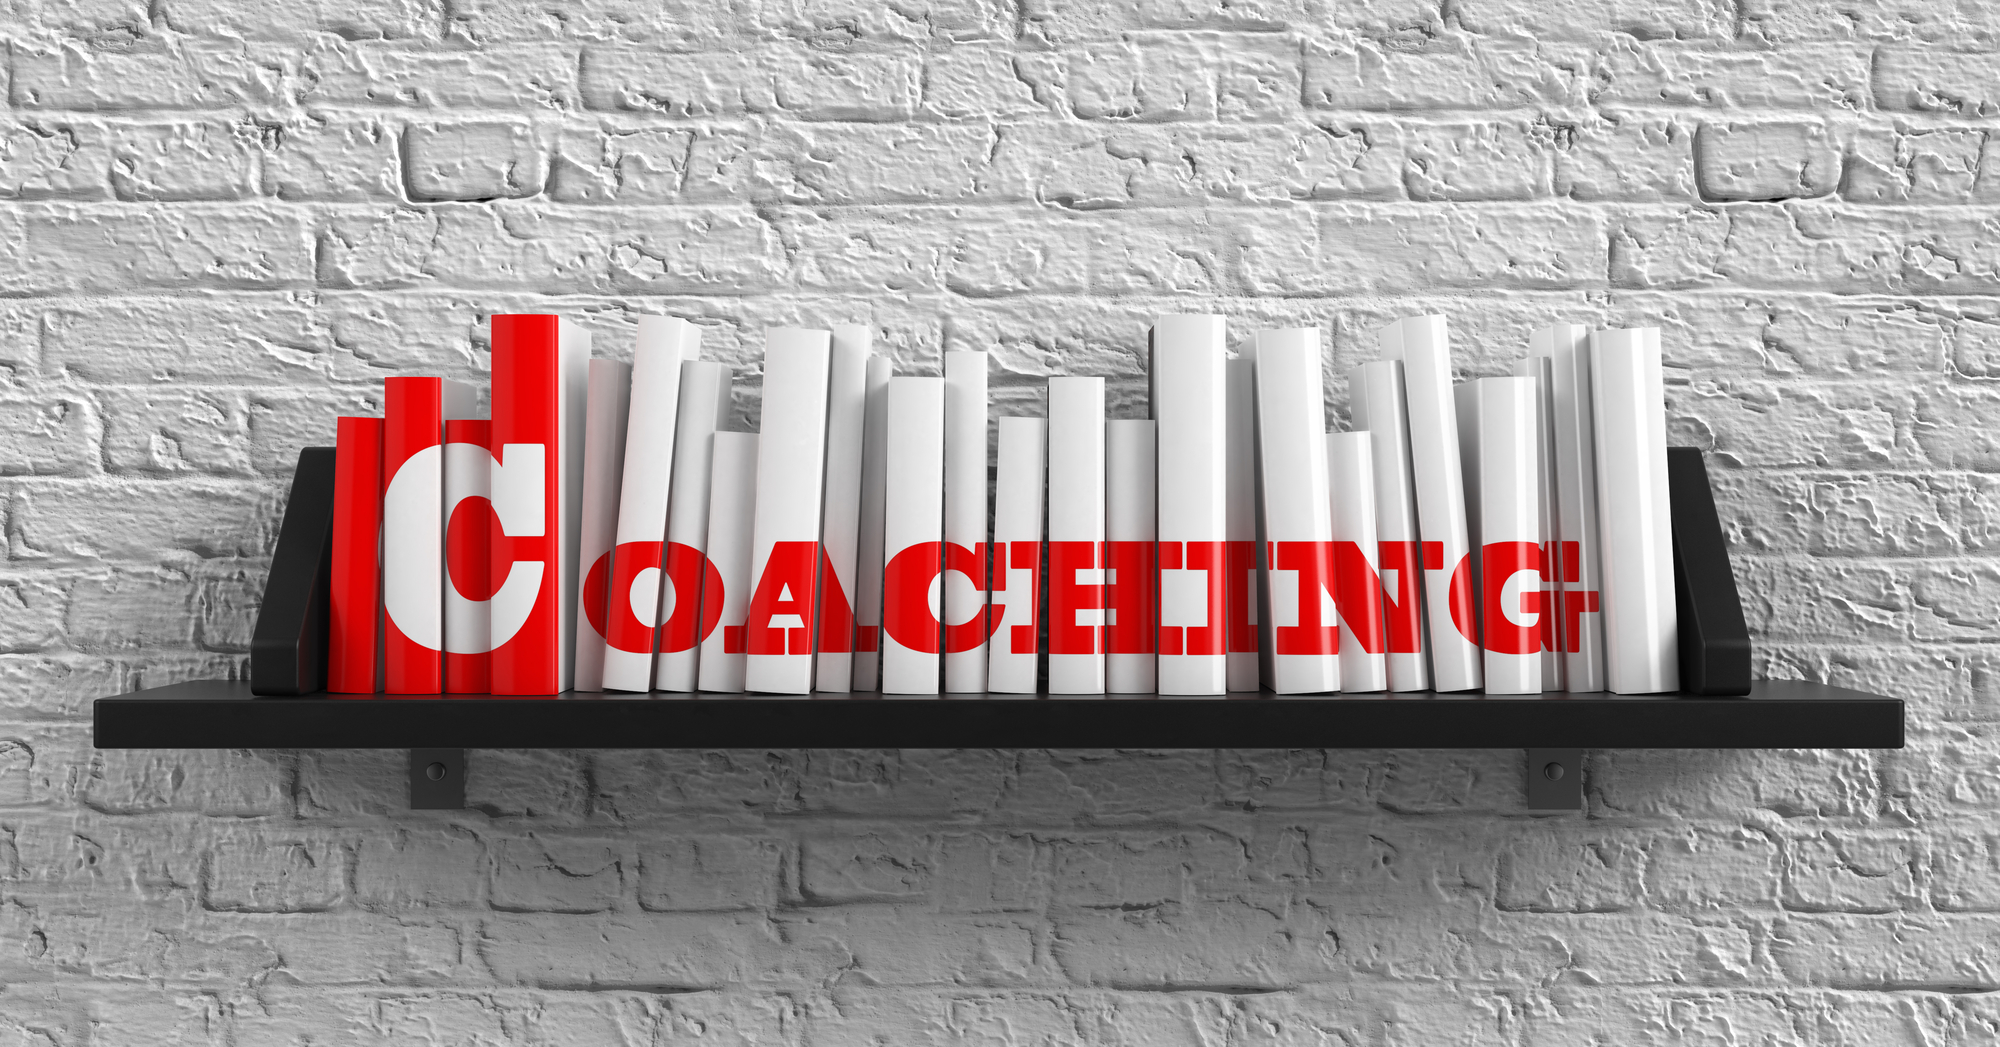 How much does life coach training cost